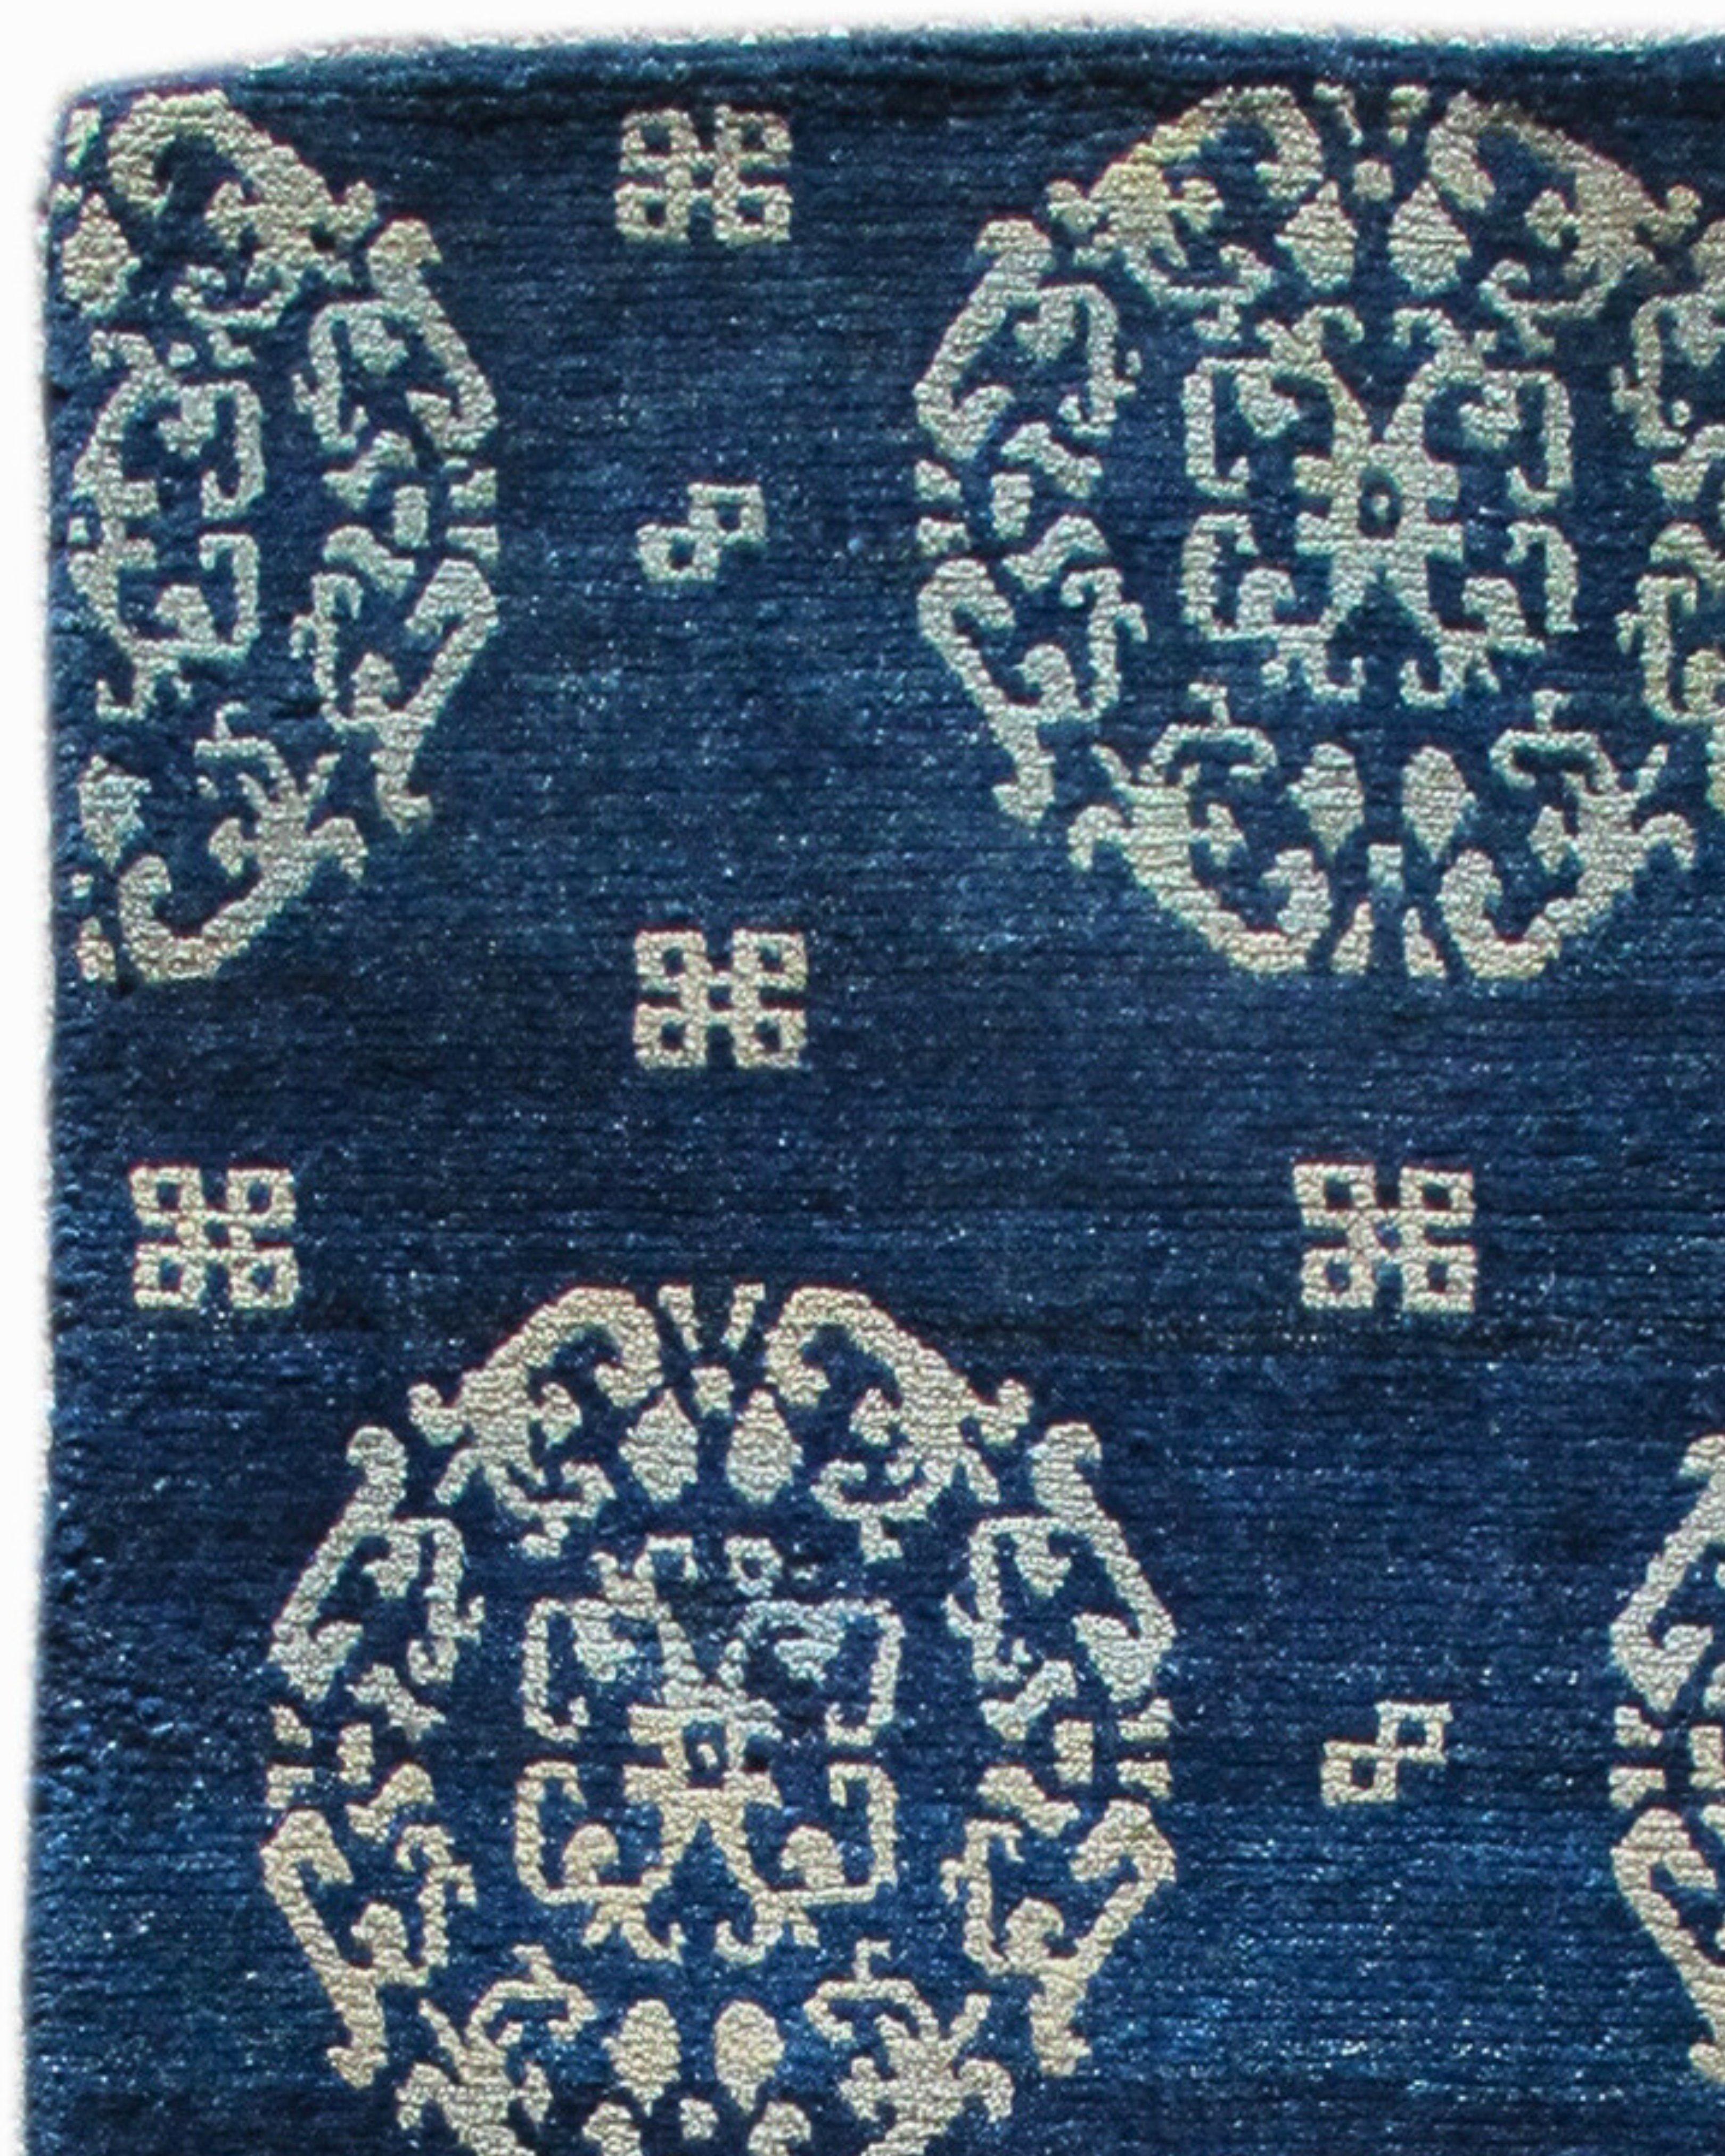 Antique Blue-Indigo Tibetan Khaden Rug with Peonies, Late 19th Century In Excellent Condition For Sale In San Francisco, CA